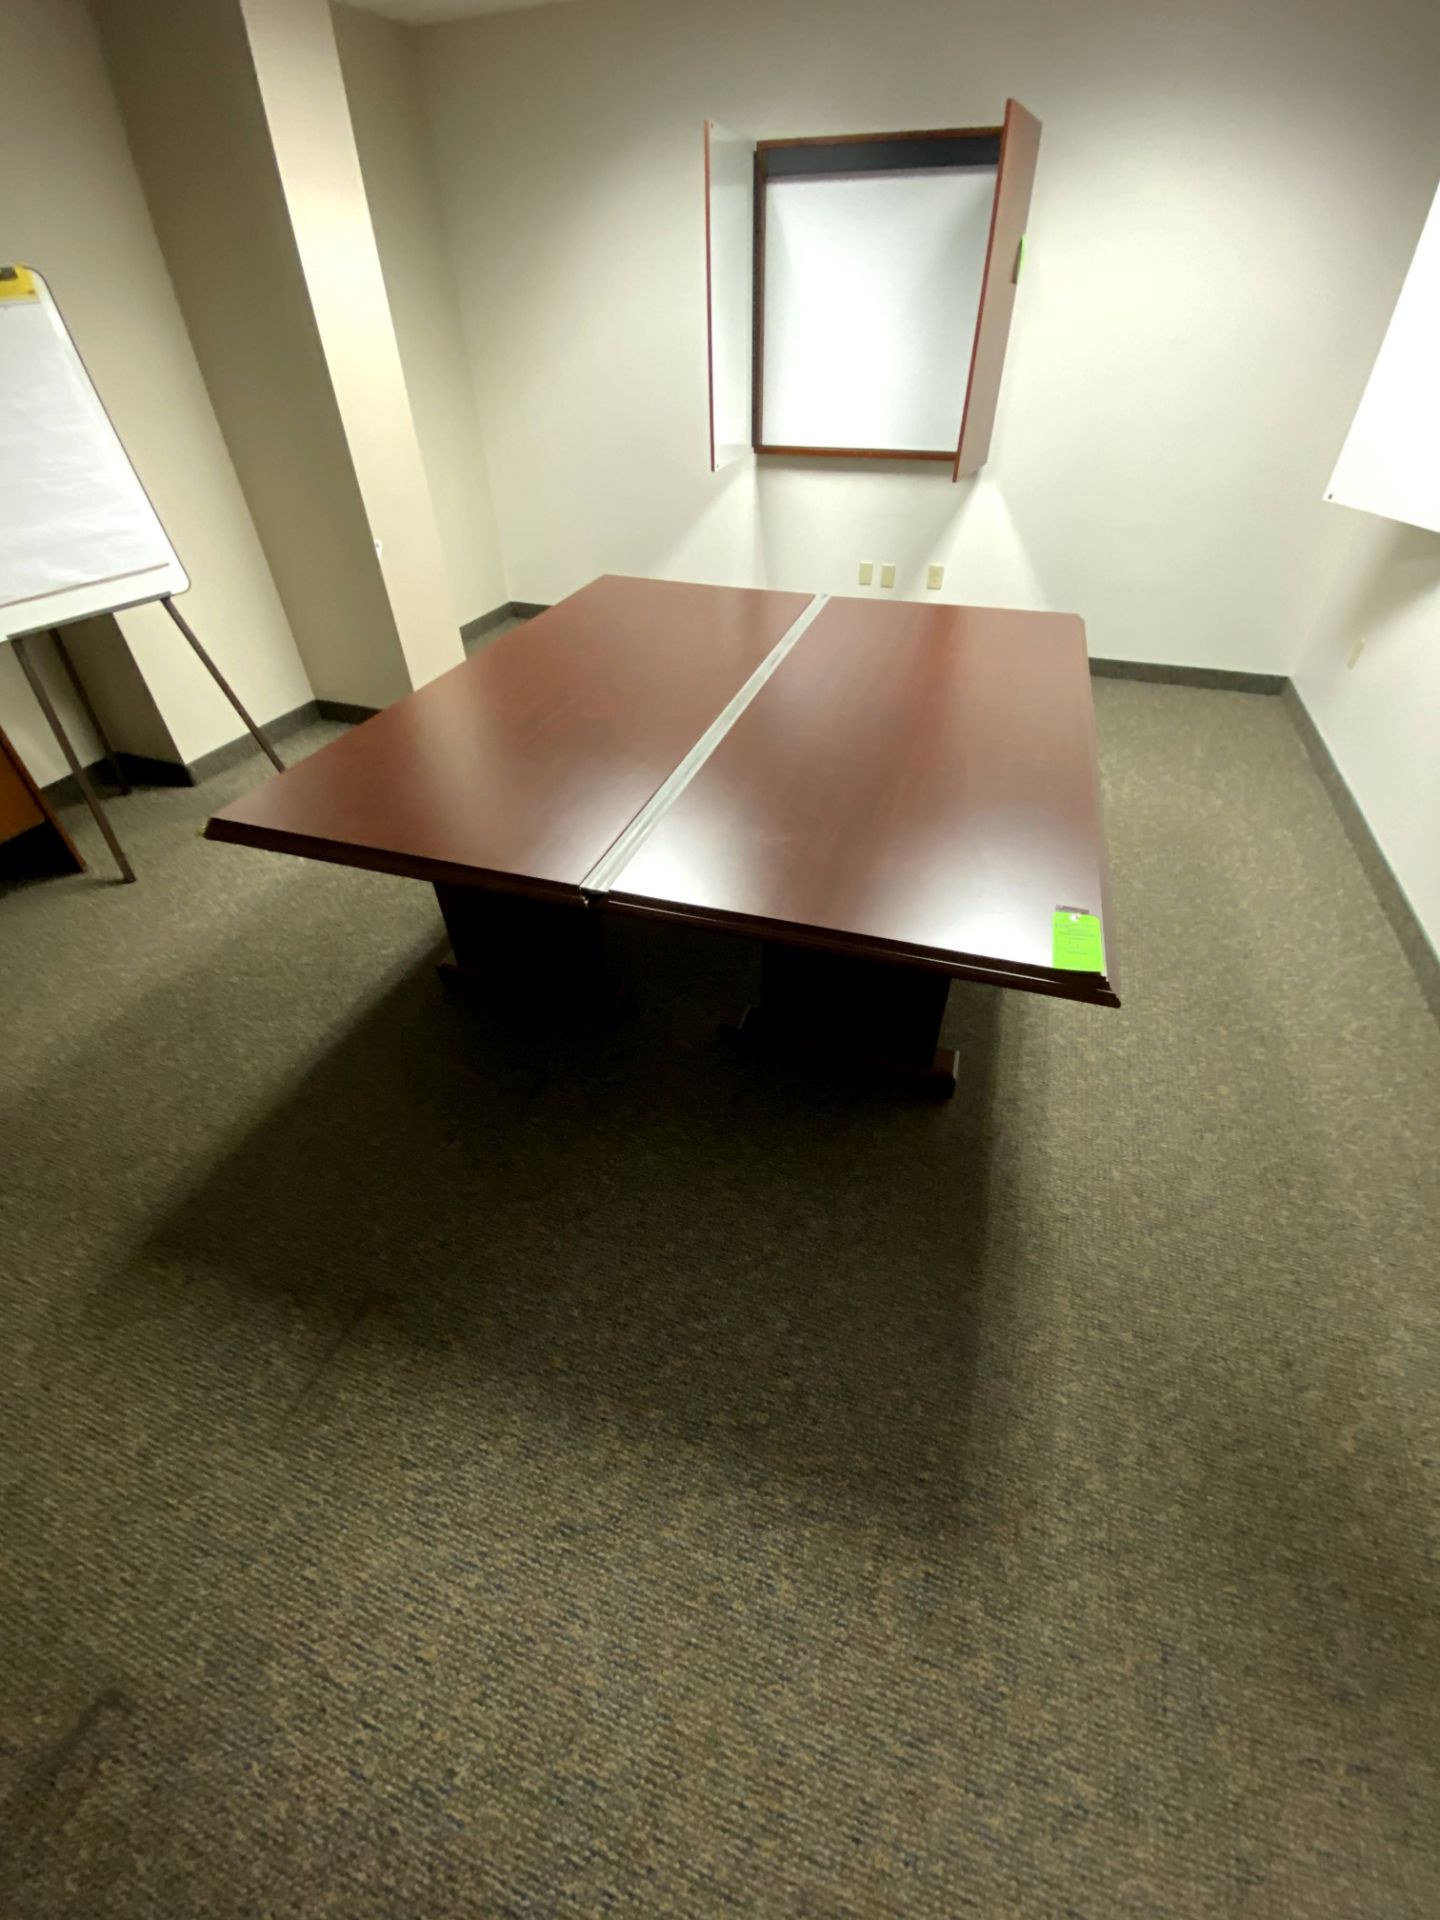 (2) 7' x 3' ARRANGEABLE CHERRY WOOD EXECUTIVE CONFERENCE TABLE(S) -- (7625 OMNITECH PLACE VICTOR NEW